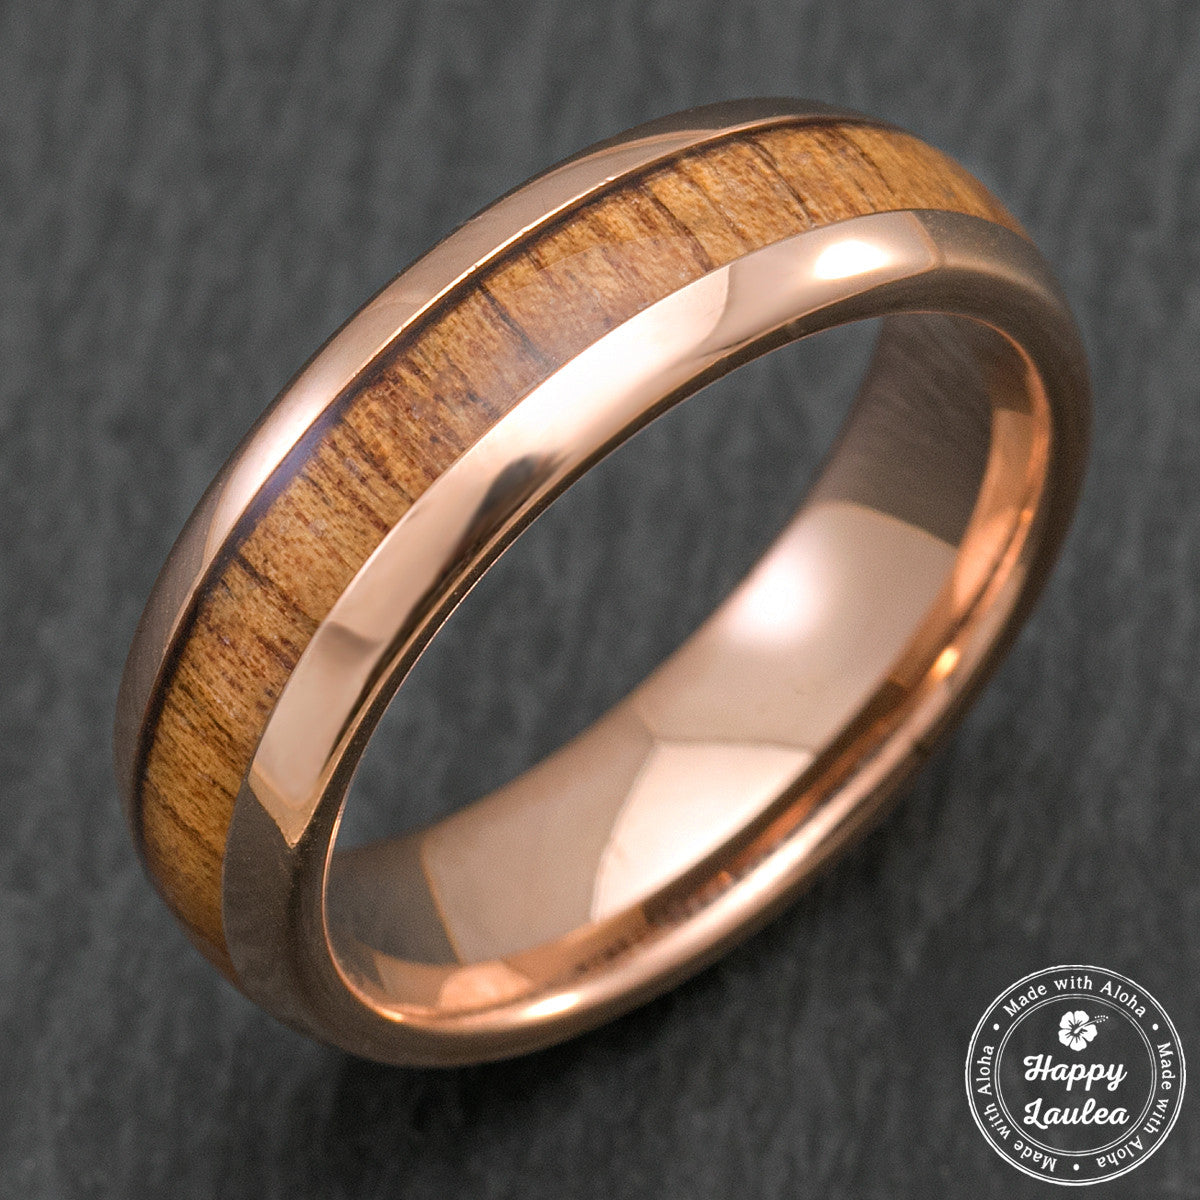 Tungsten Carbide Rose Gold Plated Ring with Koa Wood Inlay - 6mm, Dome Shape, Comfort Fitment